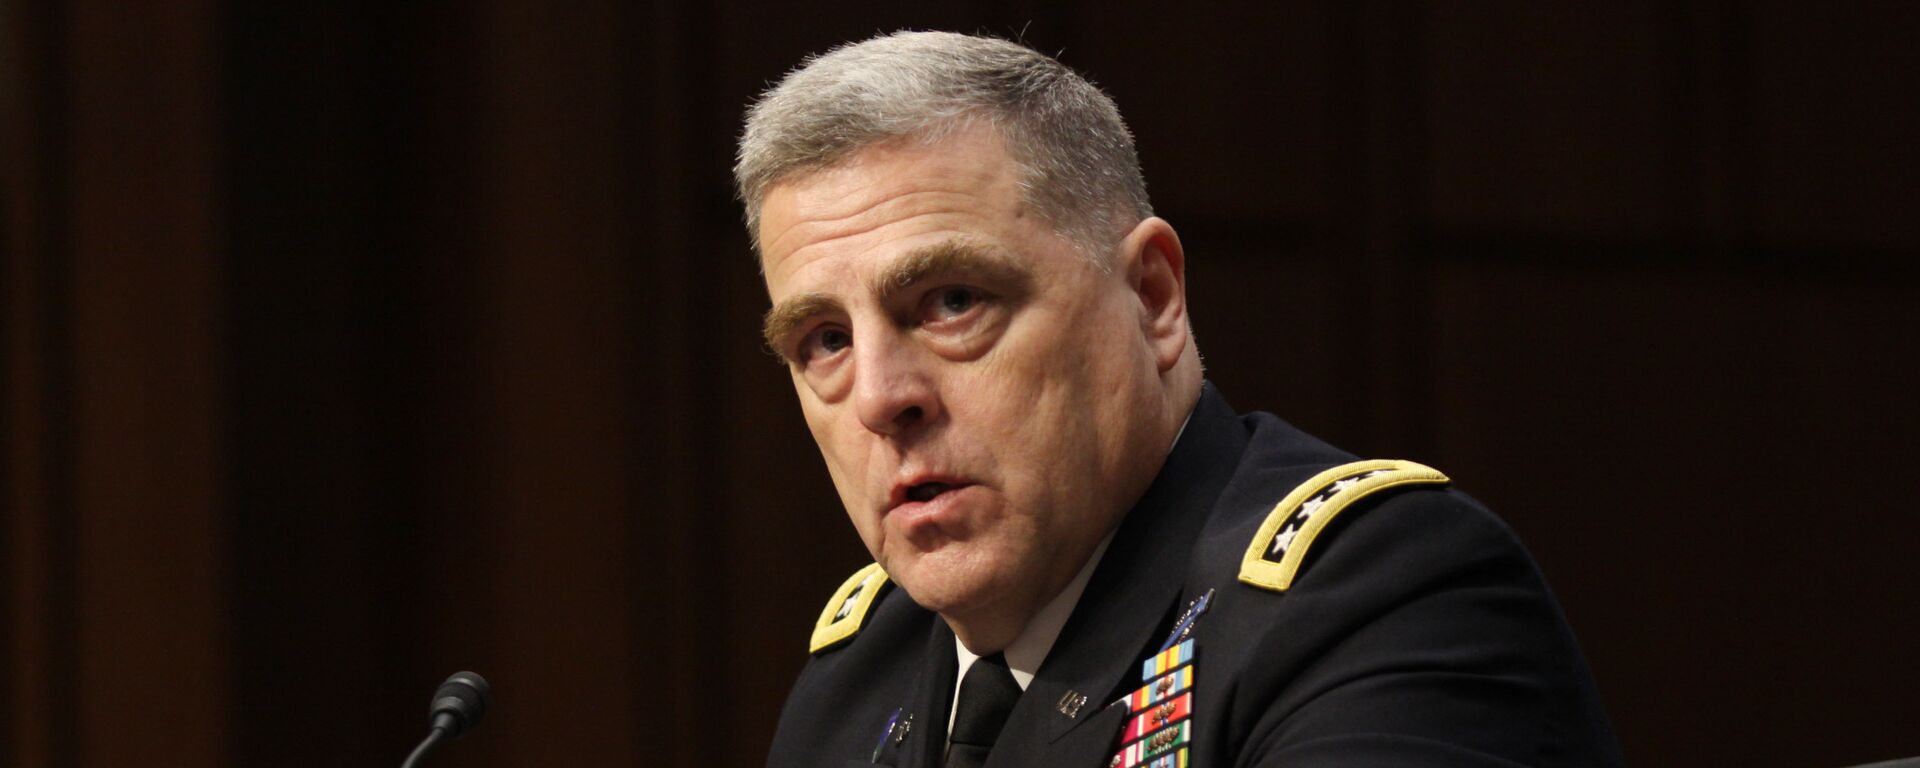 Gen. Mark Milley answers questions at his confirmation hearing to be Chief of Staff of the Army at the Senate Armed Services Committee on July 21, 2015. - Sputnik International, 1920, 05.06.2023